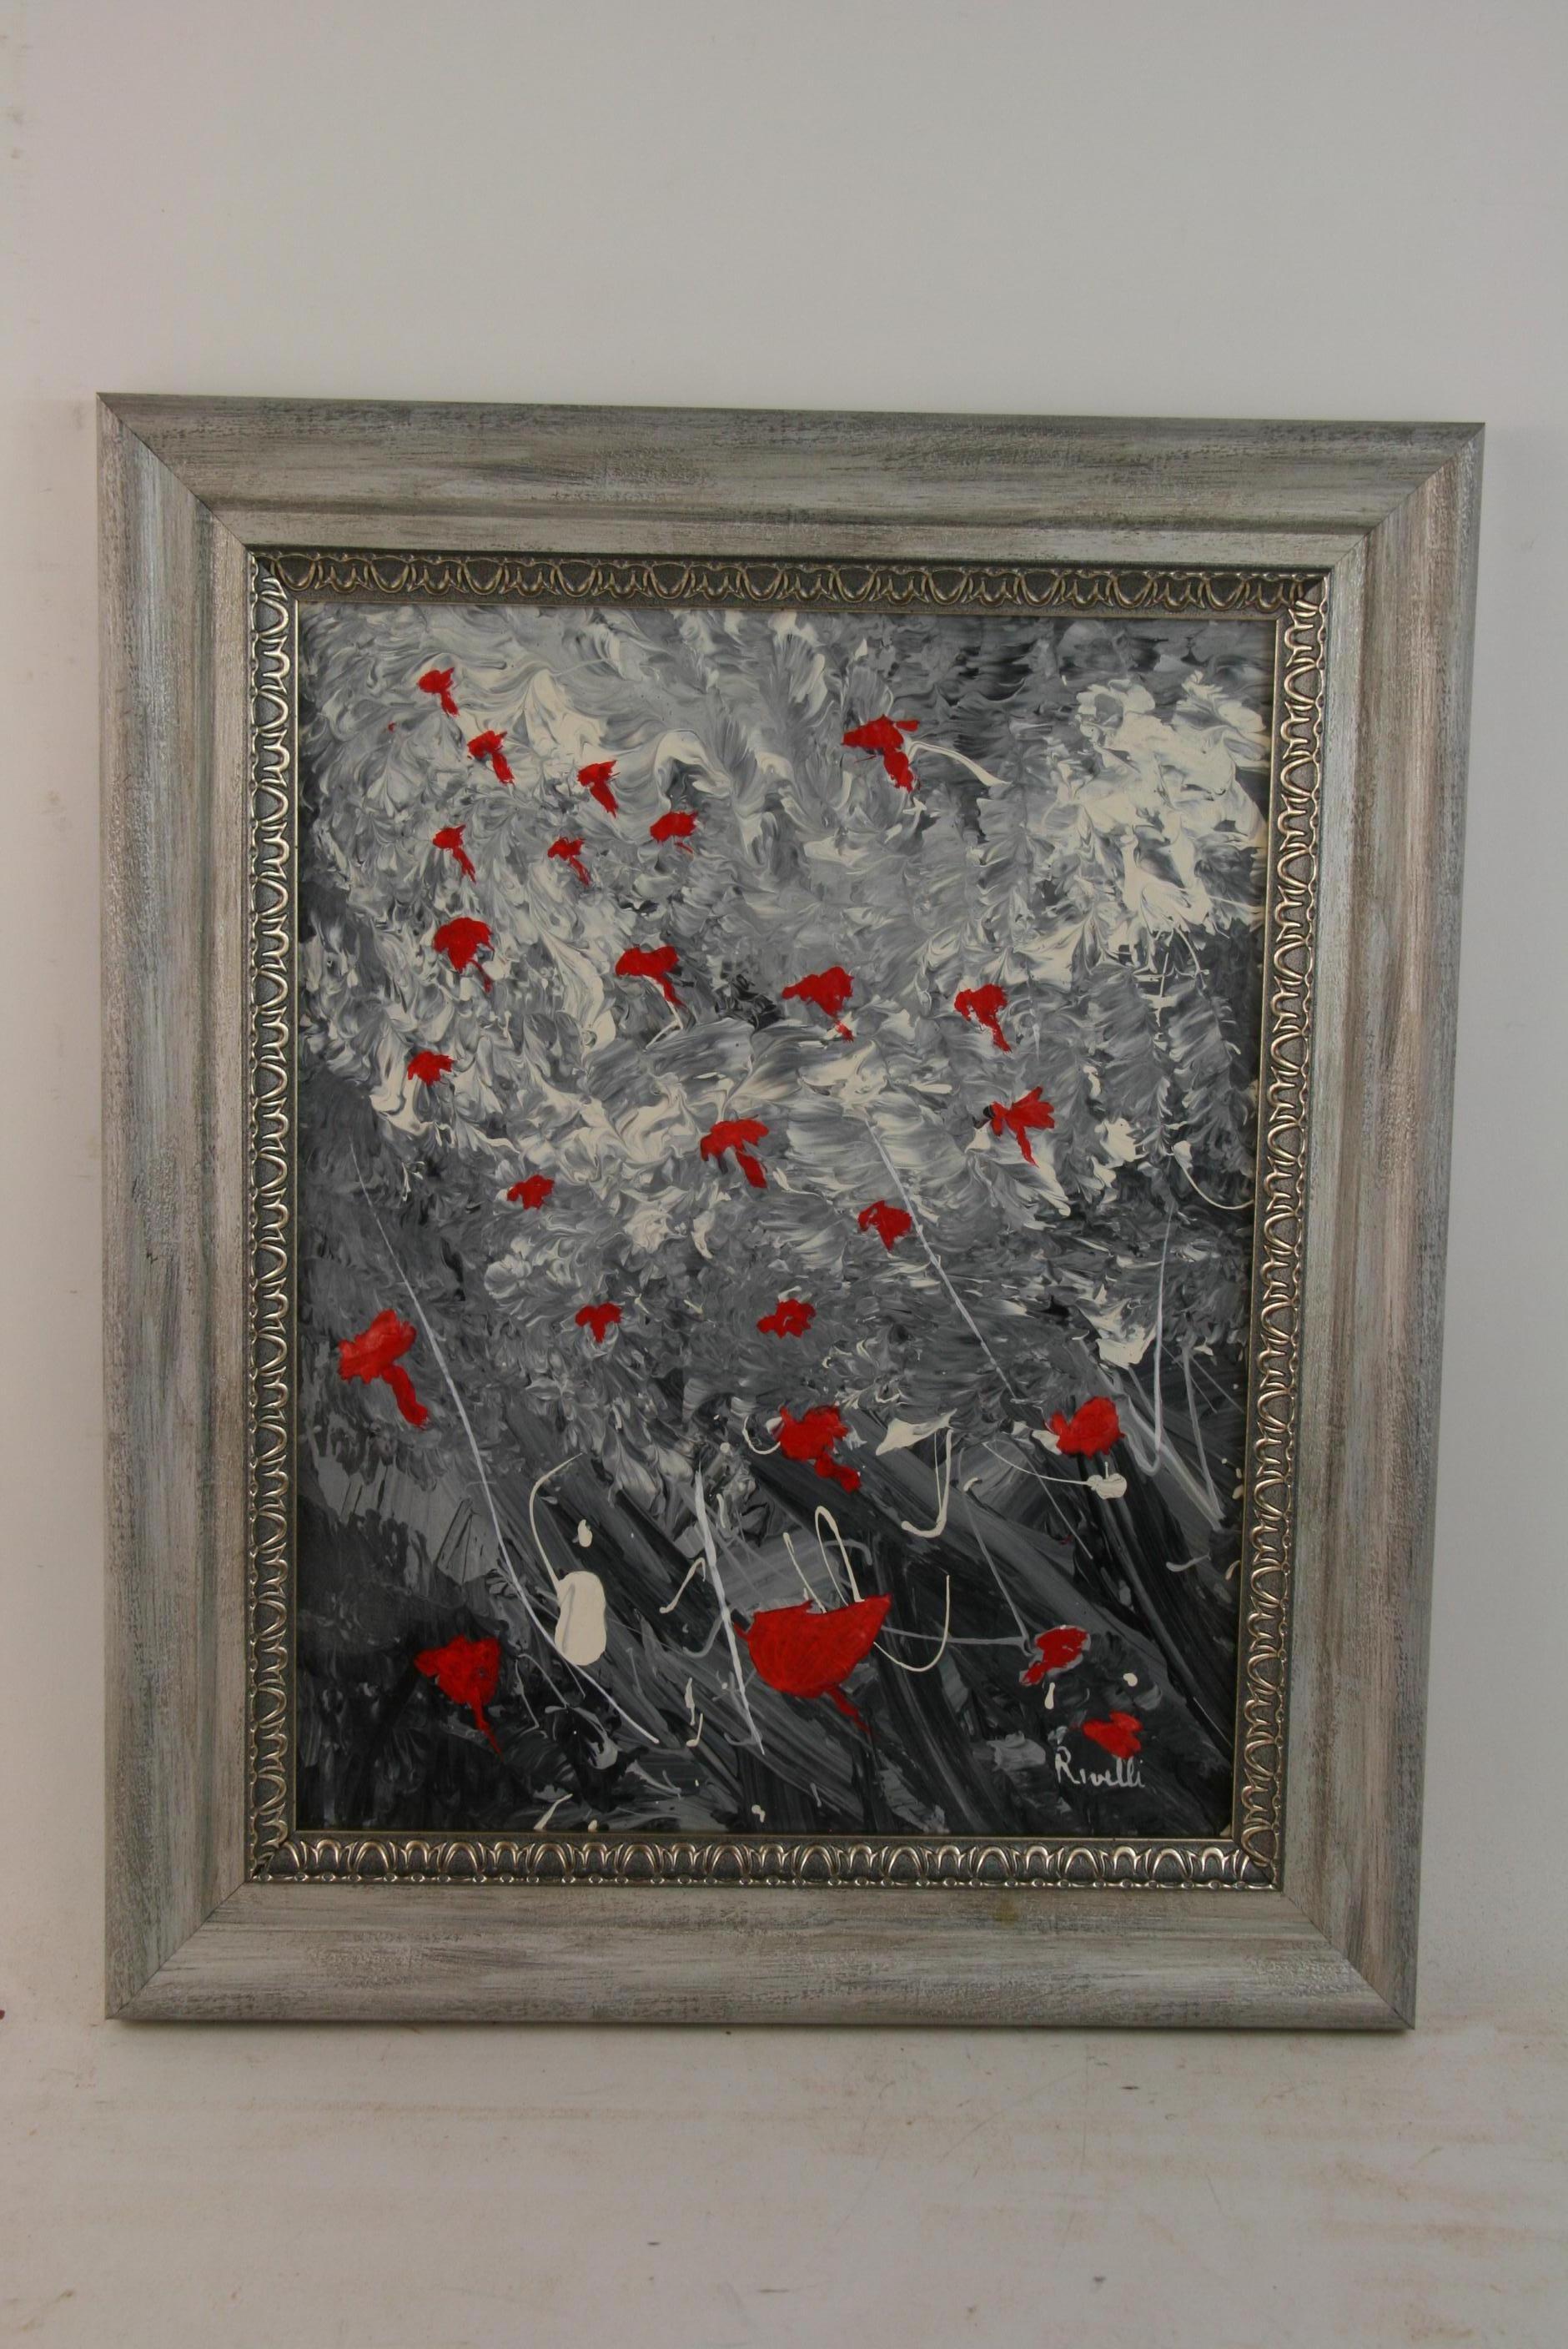 Rivelli Landscape Painting - Vintage Grey White Red Abstract Poppies Landscape